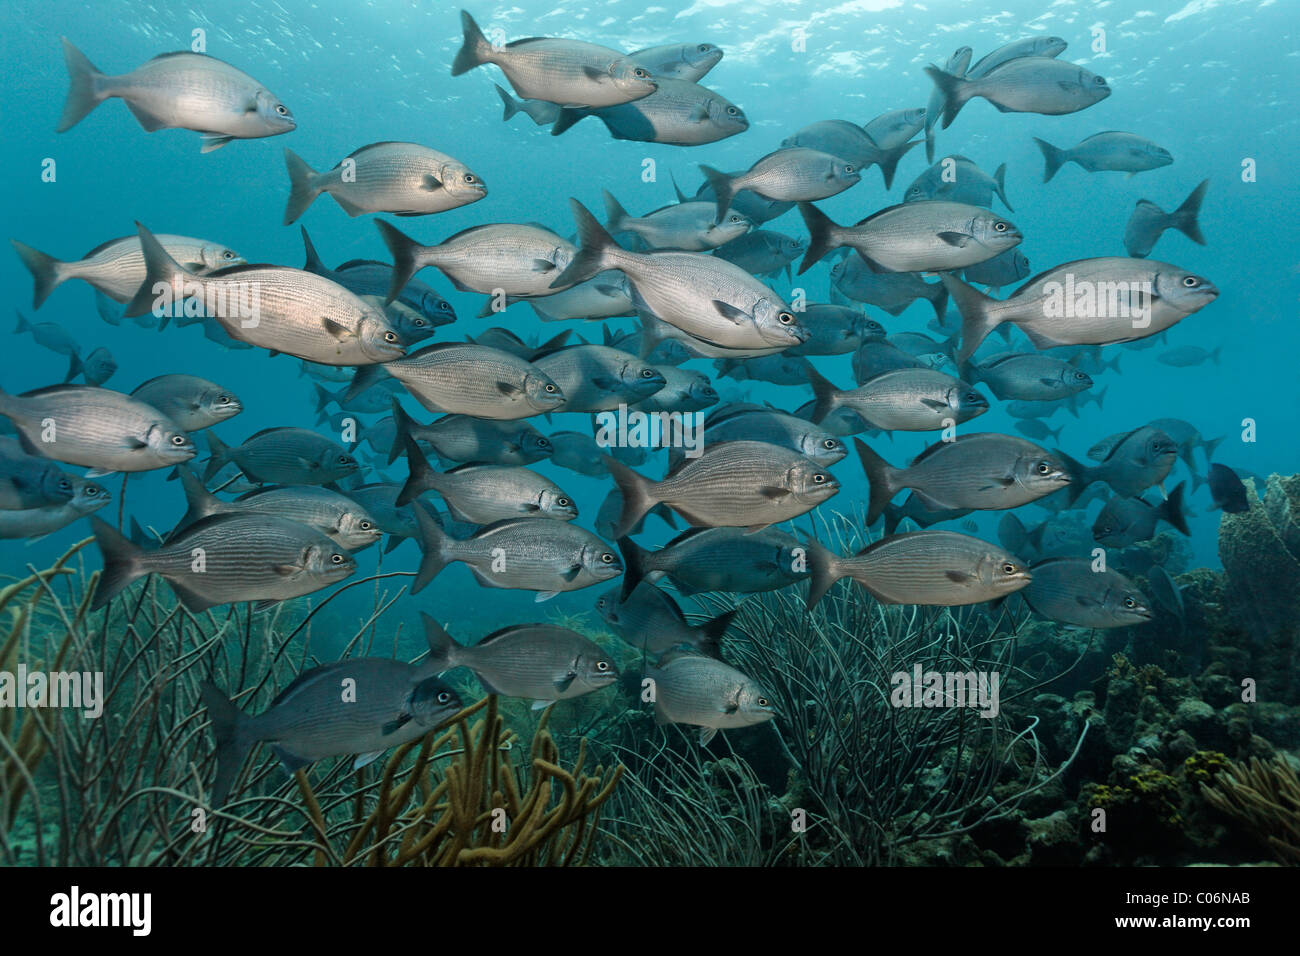 Shoal of Yellow or Bermuda Sea Chub (Kyphosus sectatrix incisor), swimming above a coral reef, Little Tobago, Speyside Stock Photo